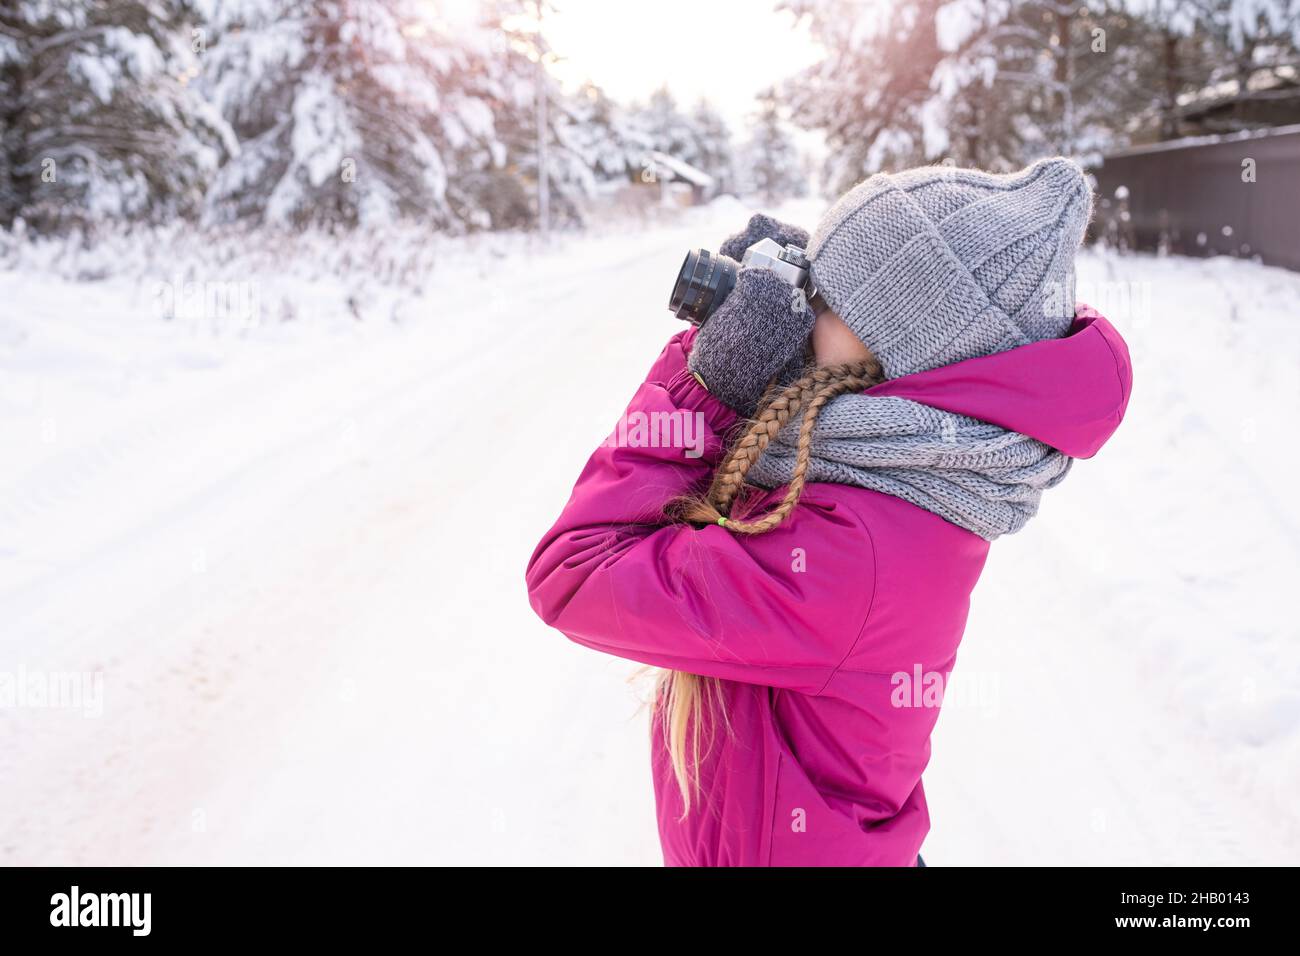 Girl in crimson winter clothes and gray knitted set is taking photo, standing sideways on winter road against background of snowy pine trees. Child Stock Photo